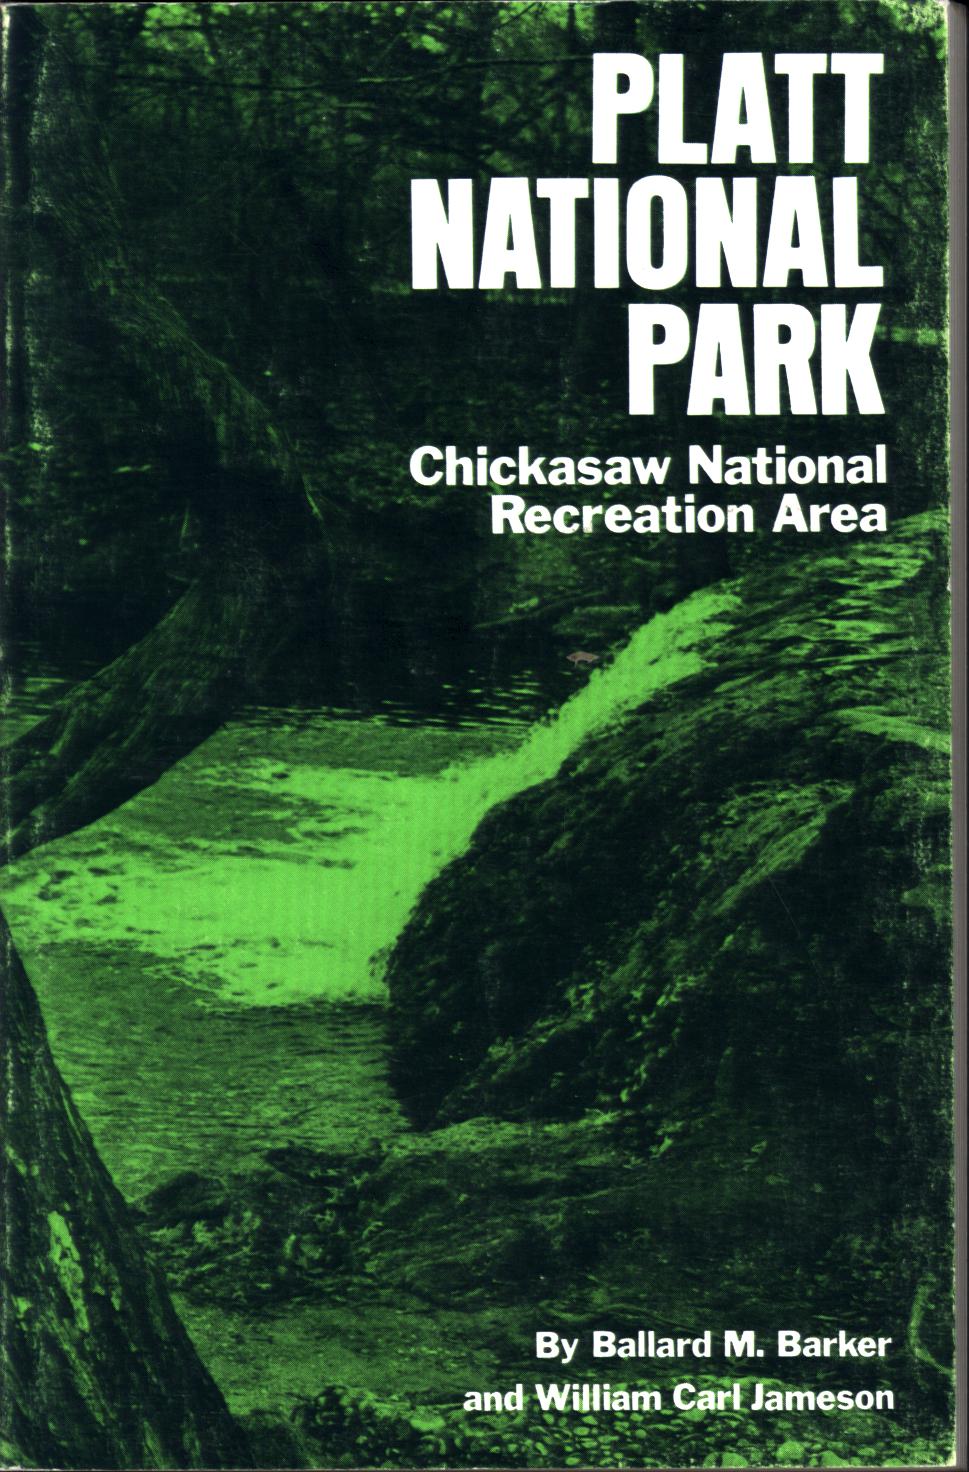 PLATT NATIONAL PARK: environment and ecology (now Chickasaw National Recreation Area).